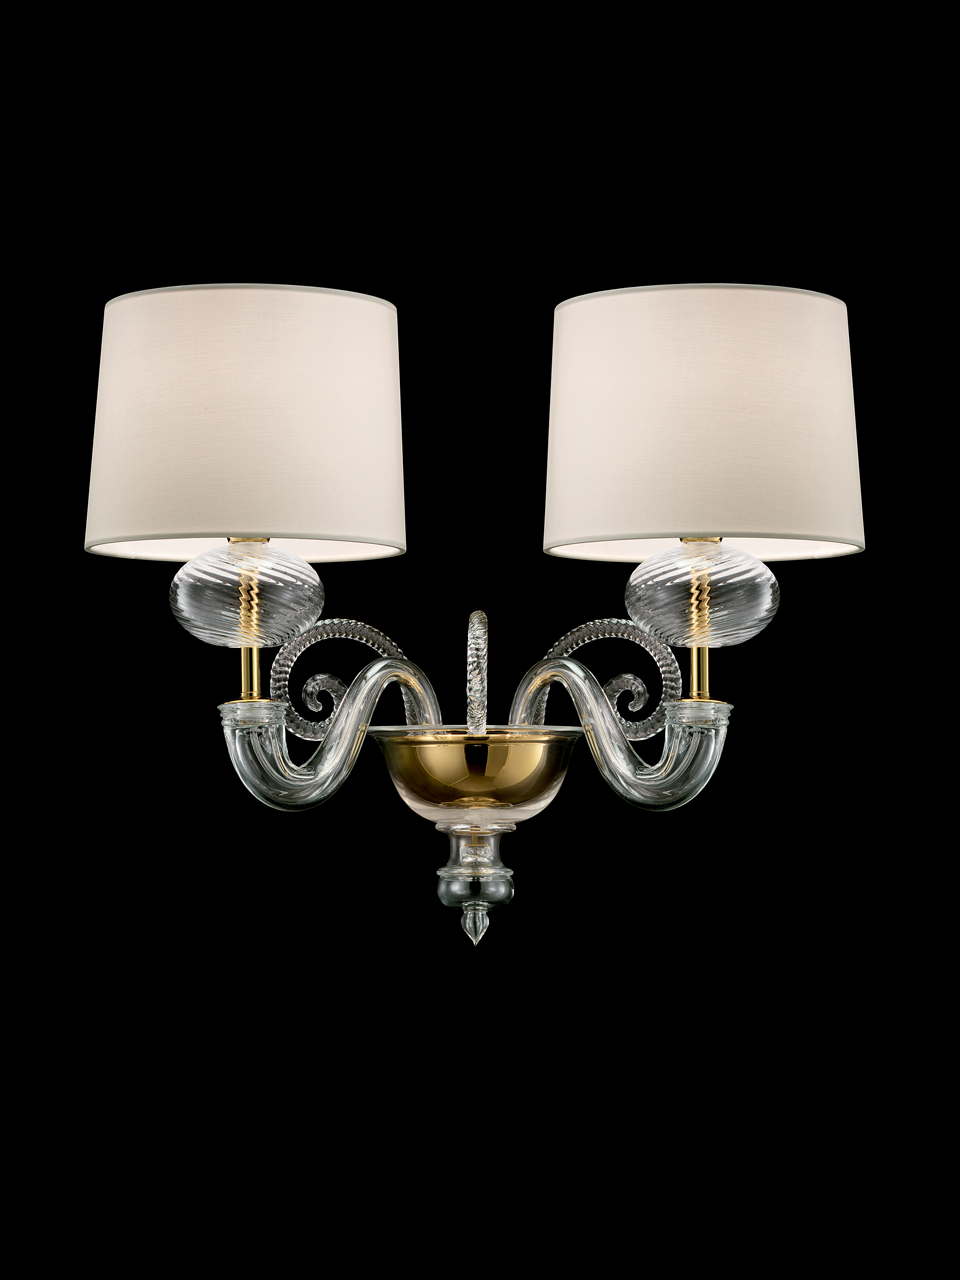 Tangeri classic wall lamp in crystal and gilded metal 2 lights. Barovier&Toso. 